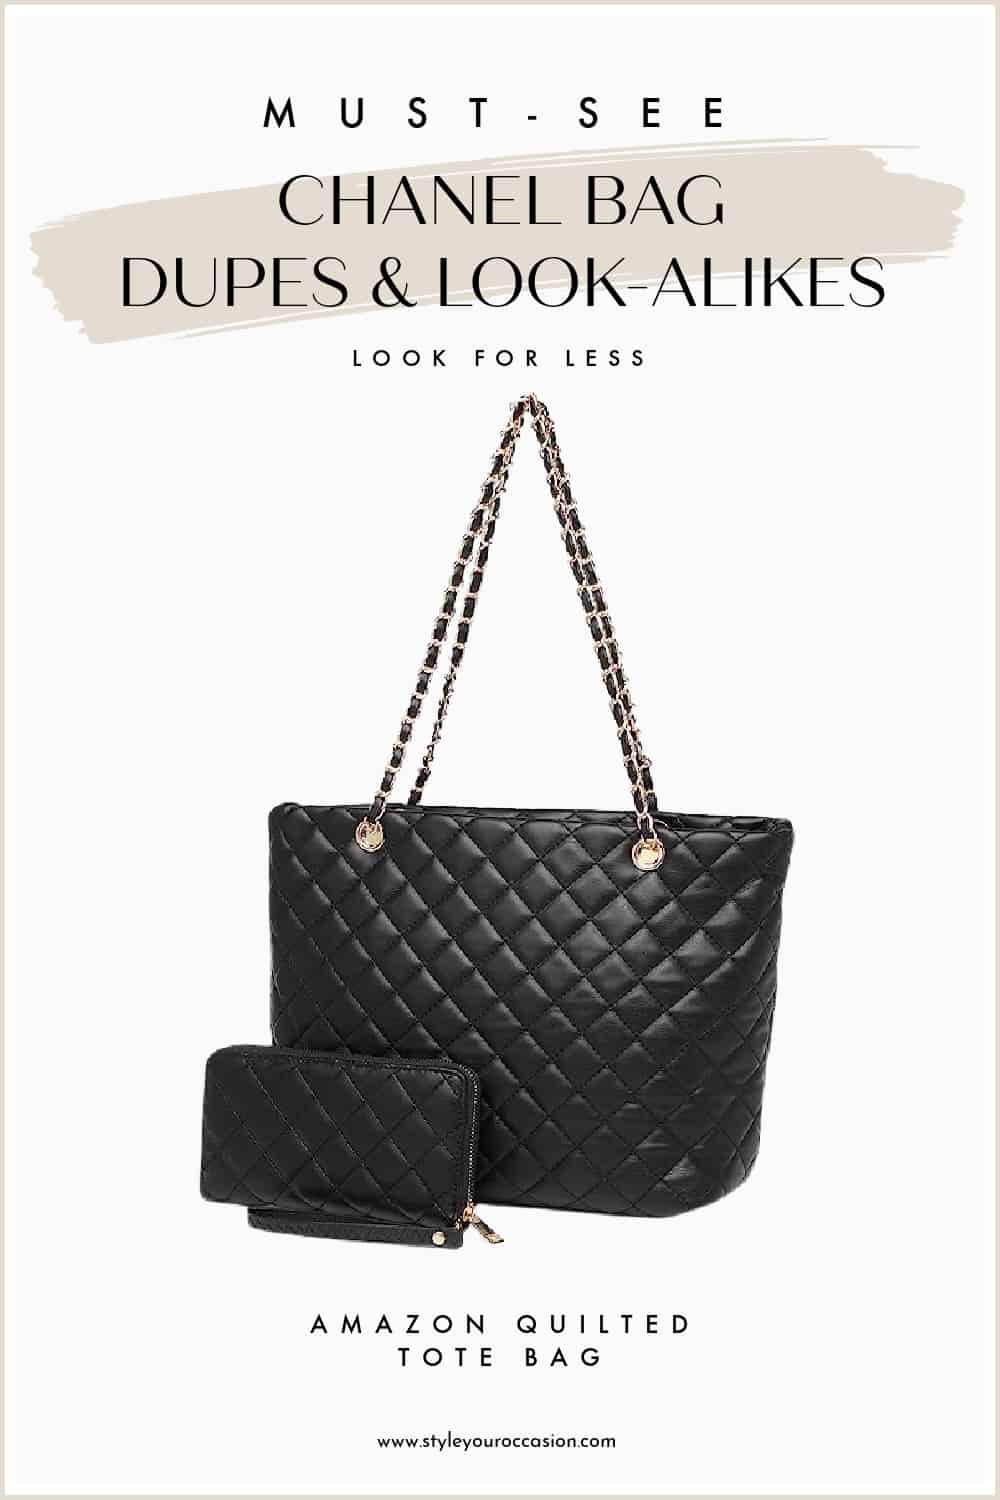 An image of a black quilted Chanel tote dupe from Amazon